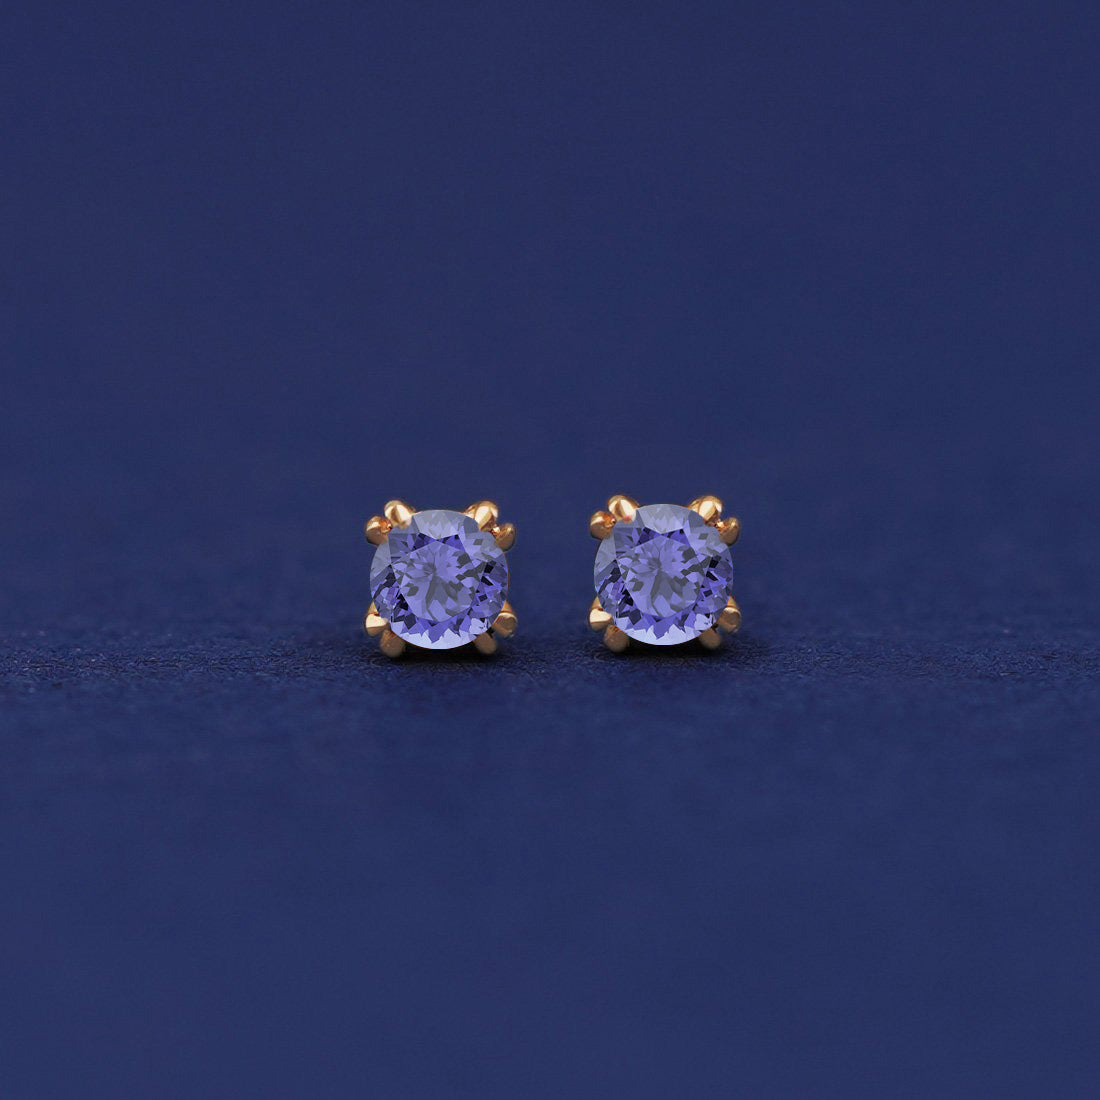 A pair of 14 karat gold studs earrings with 3 millimeter round Tanzanite gemstones on a dark blue background